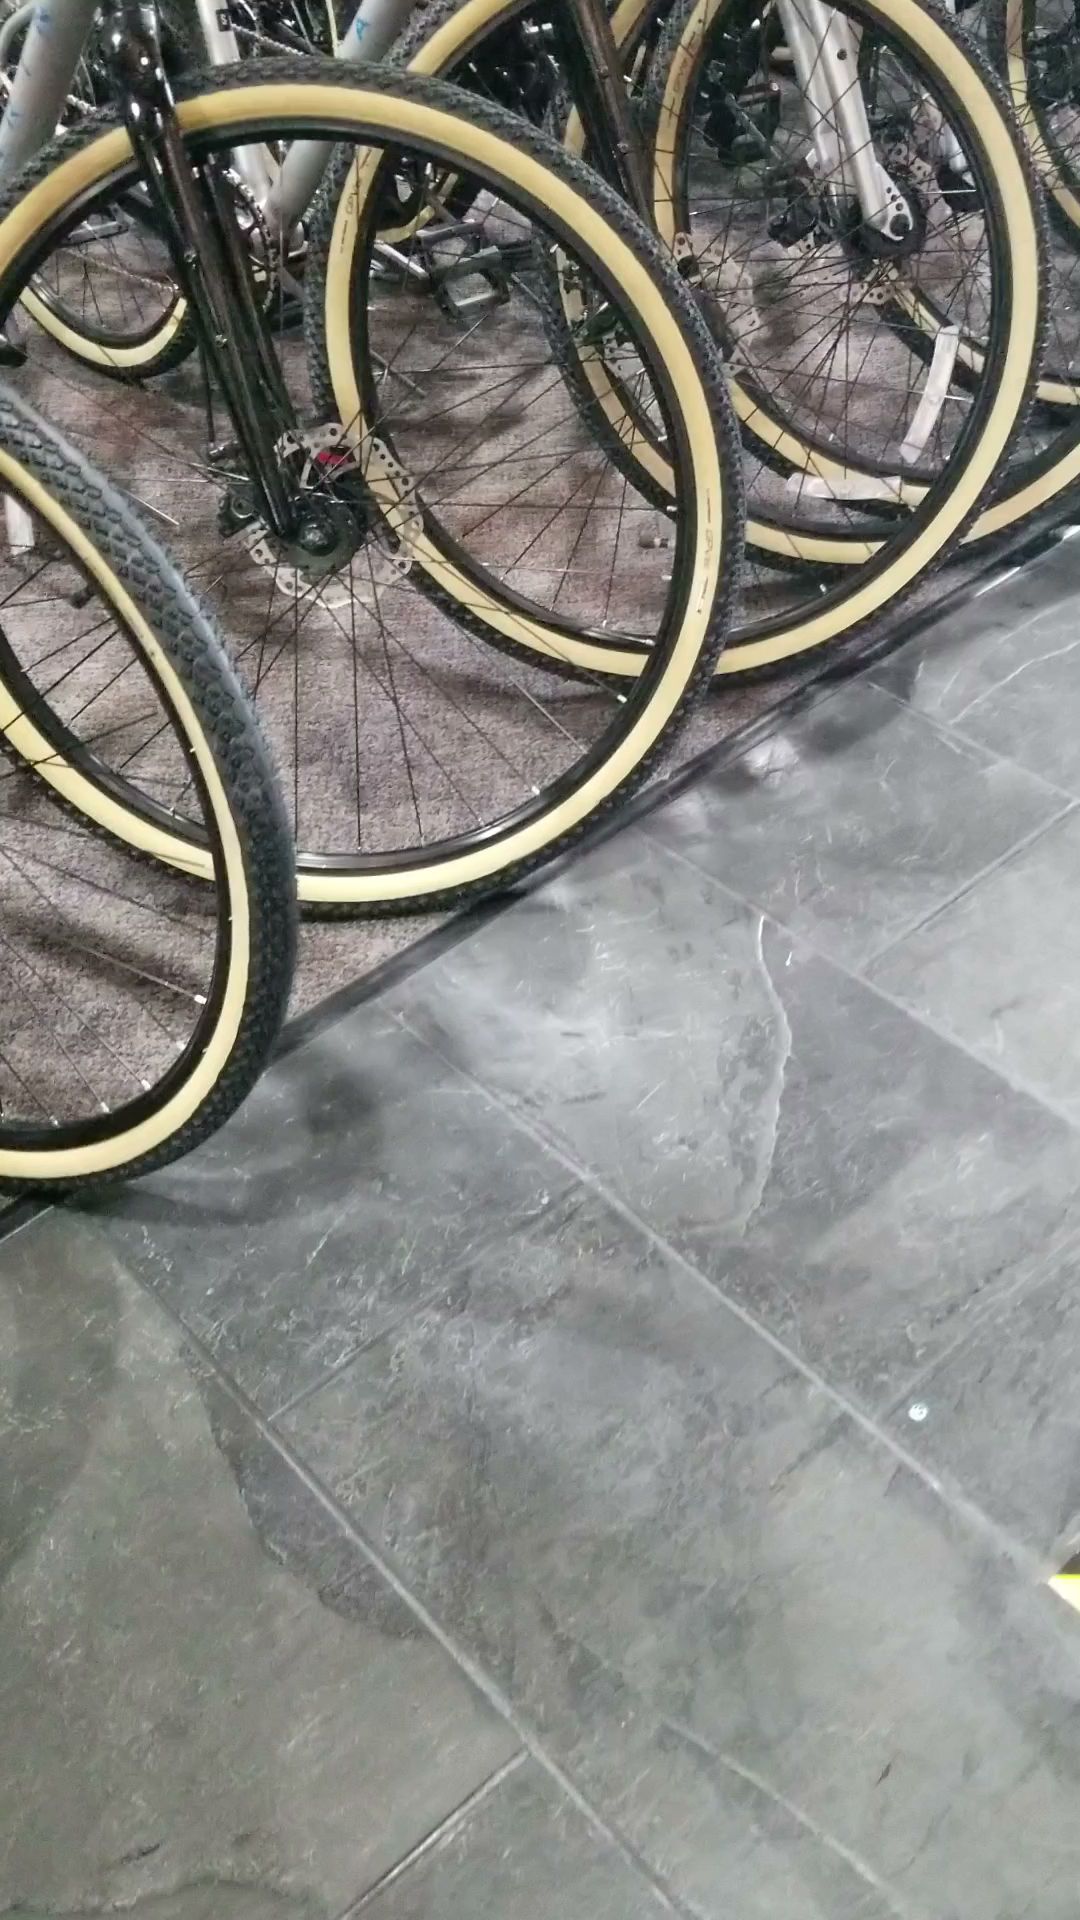 The Bike Connection